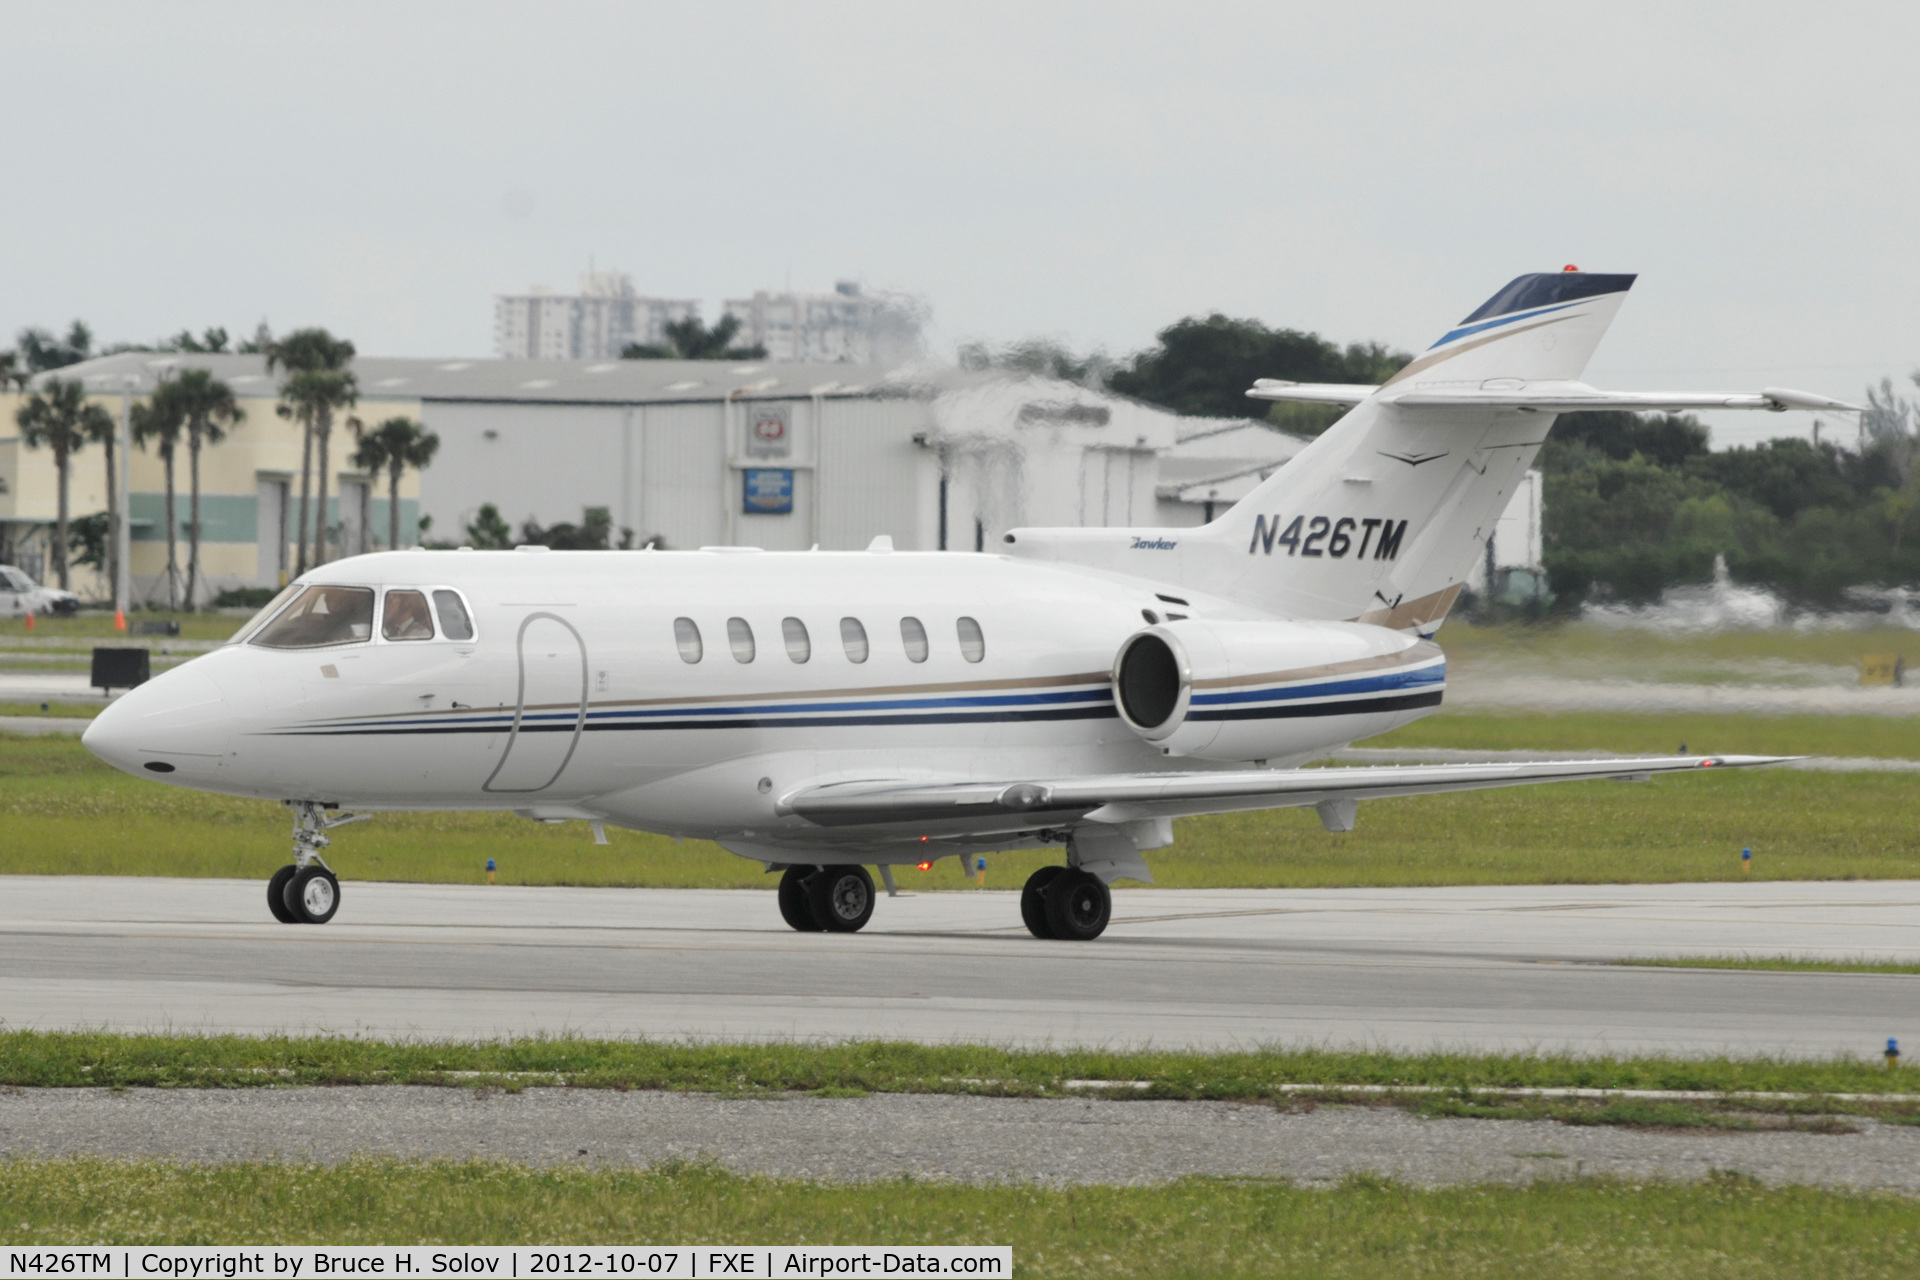 N426TM, 2004 Raytheon Hawker 800XP C/N 258680, Lined up for departure